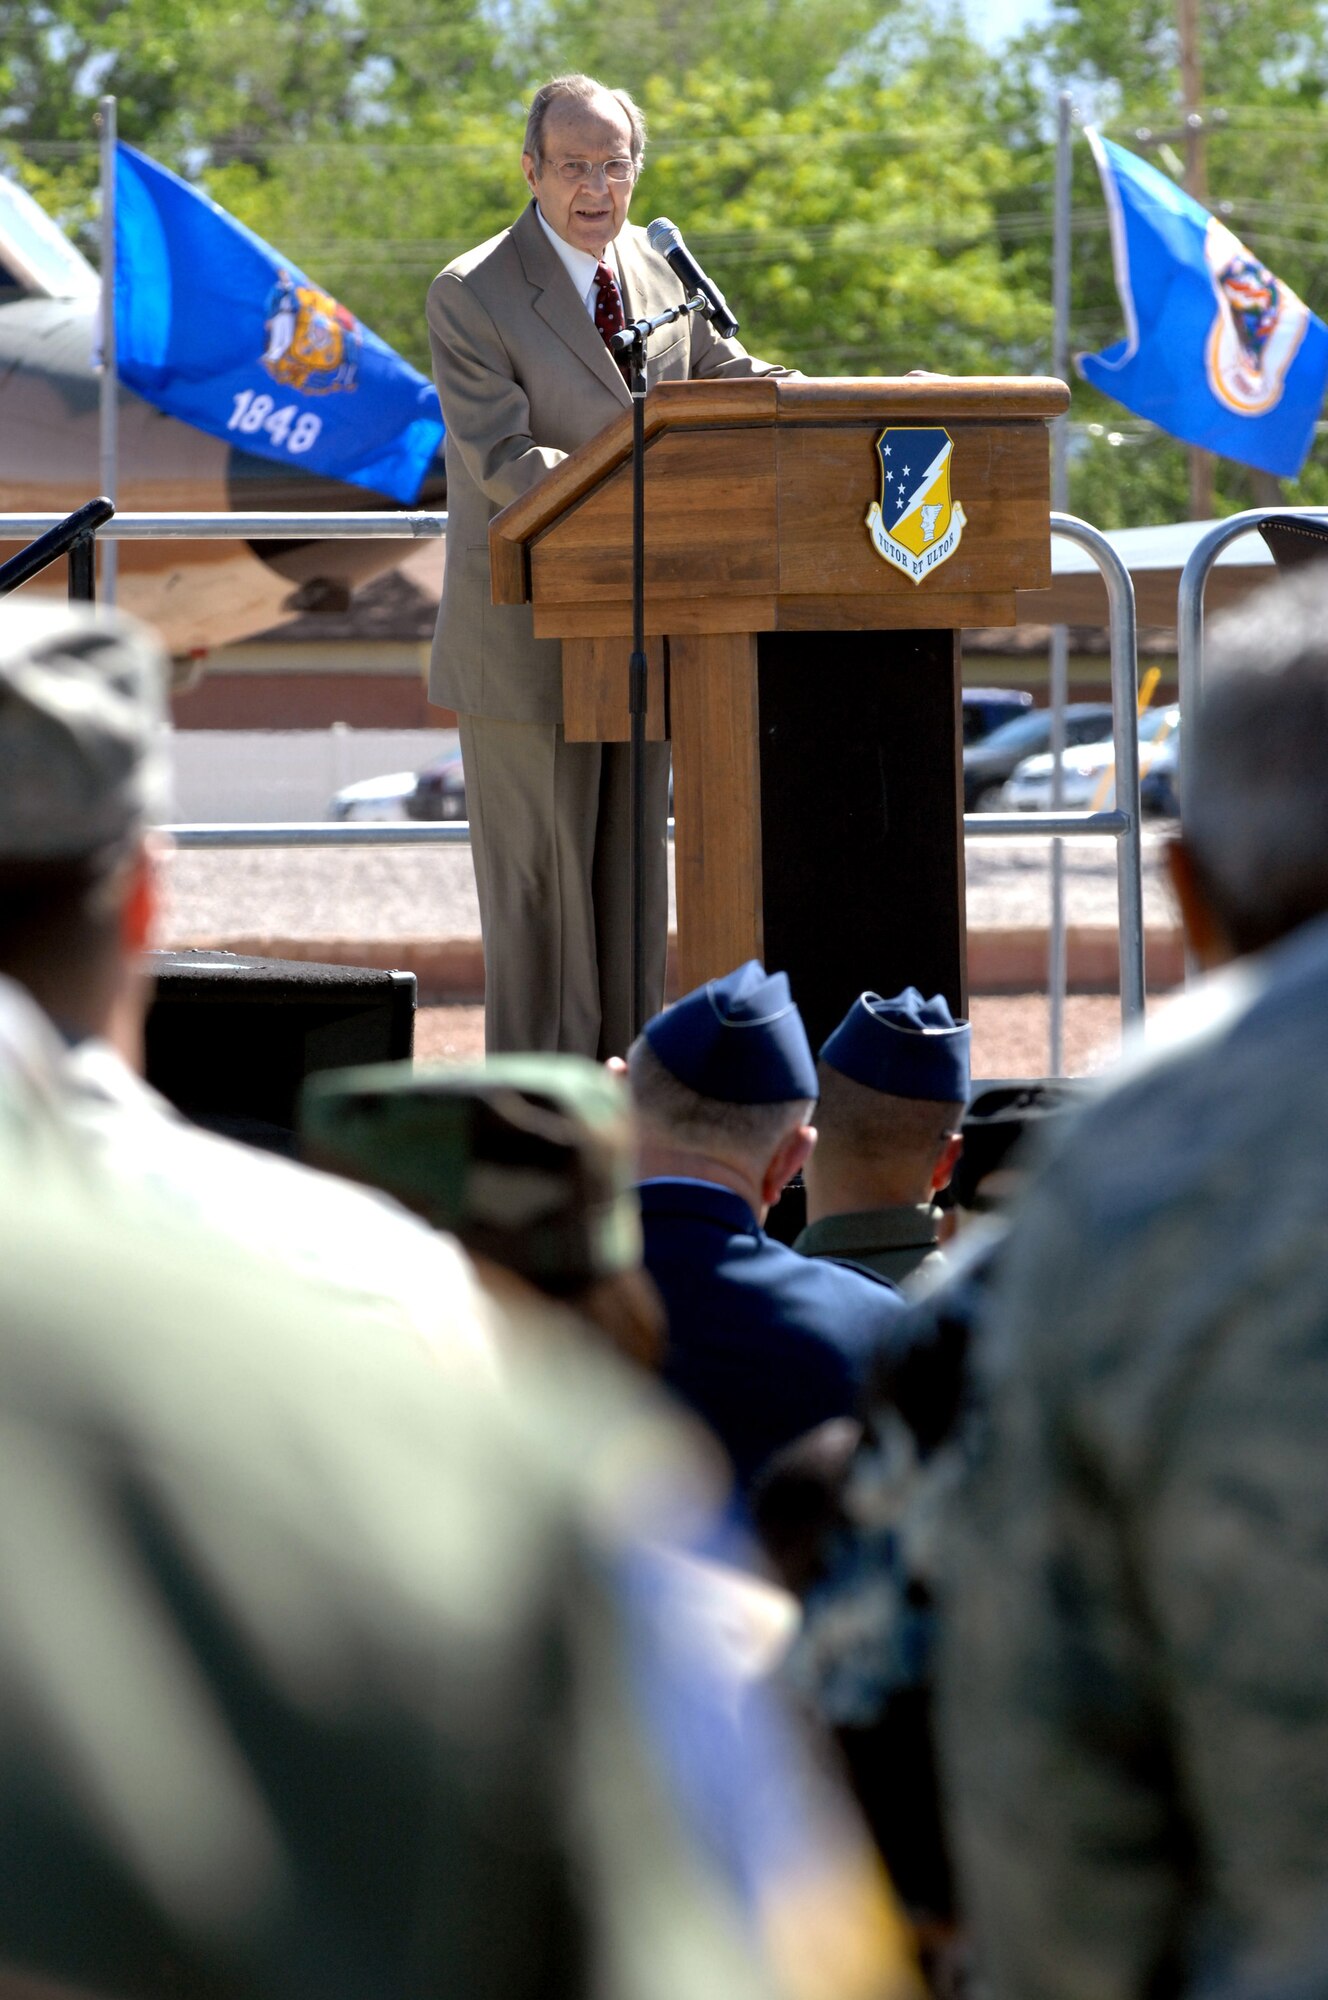 Former Secretary of Defense Dr. William J. Perry was the  guest speaker, during the Sunset Stealth F-117A Retirement Ceremony Apr 21, Holloman Air Force Base, N.M.
(U.S. Air Force photo/ Senior Airman Anthony Nelson Jr)
